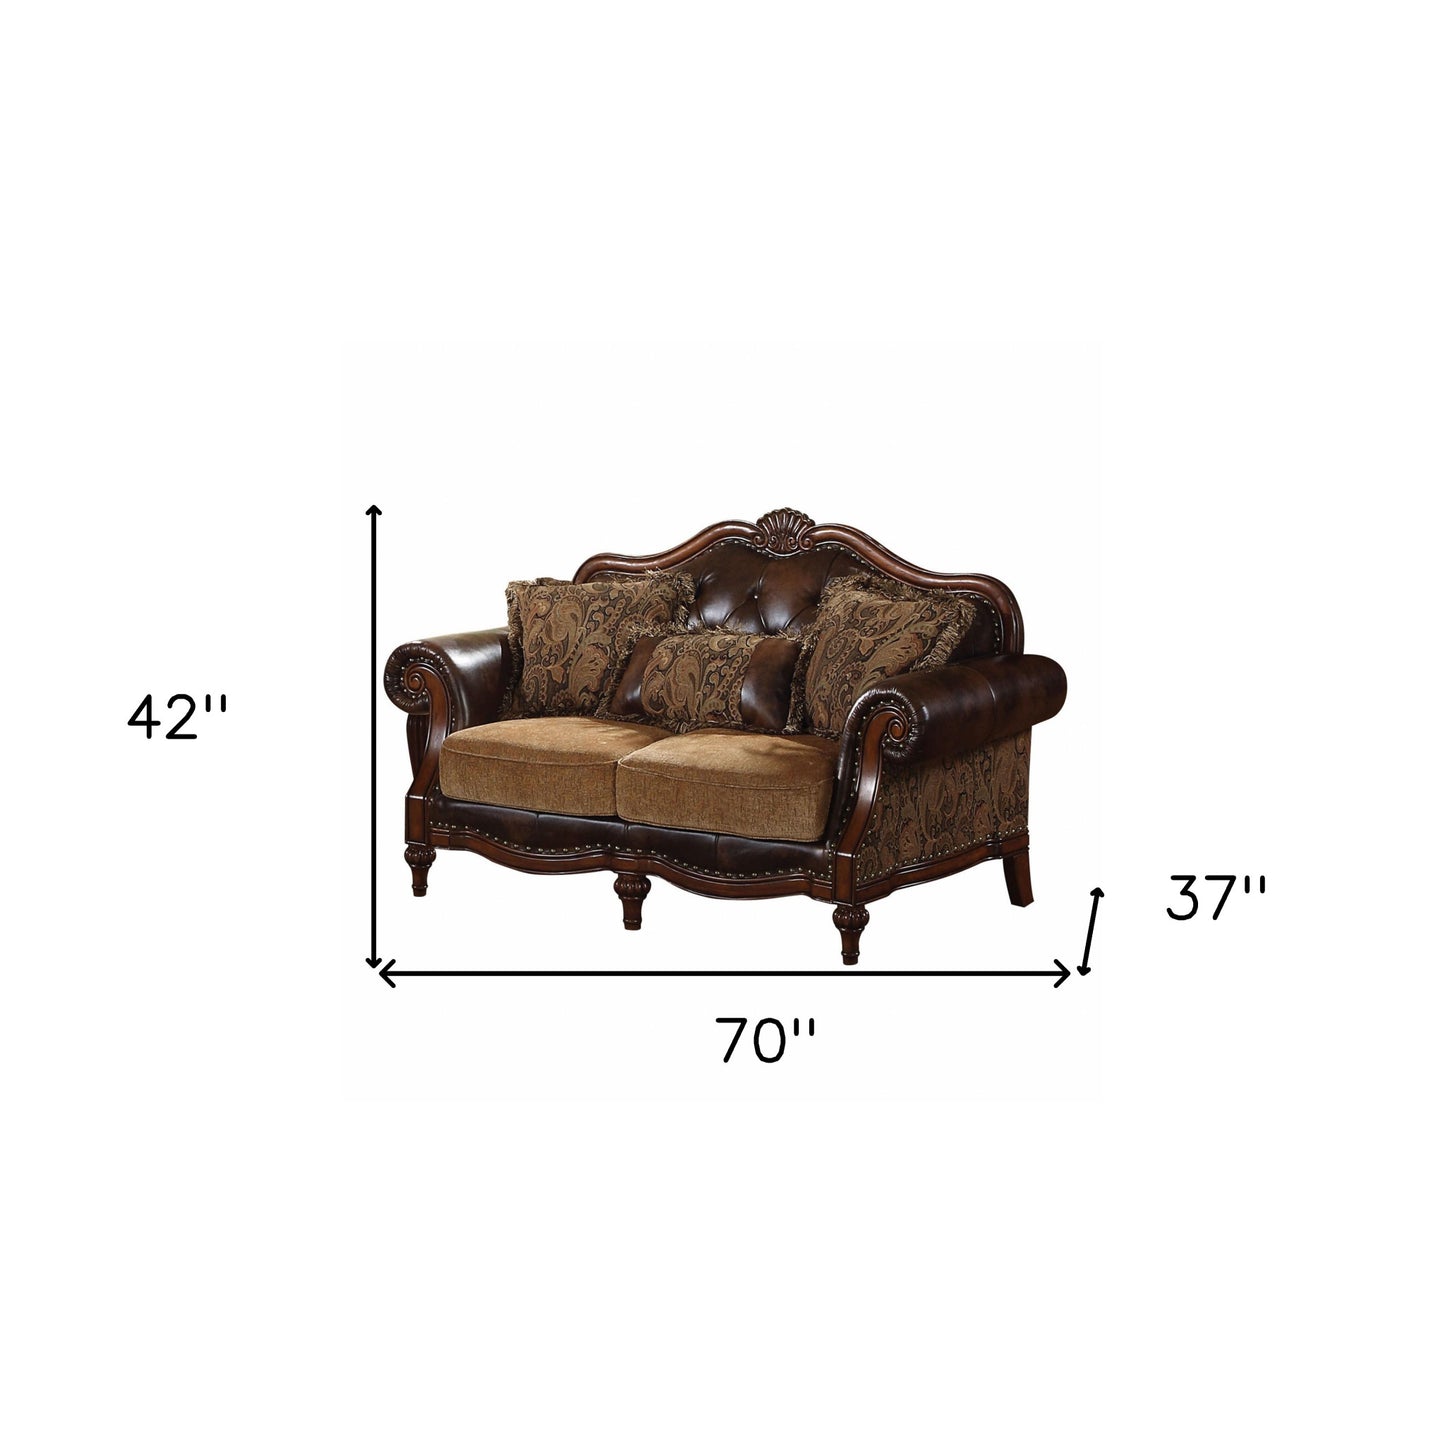 70" Brown Faux Leather Chesterfield Loveseat